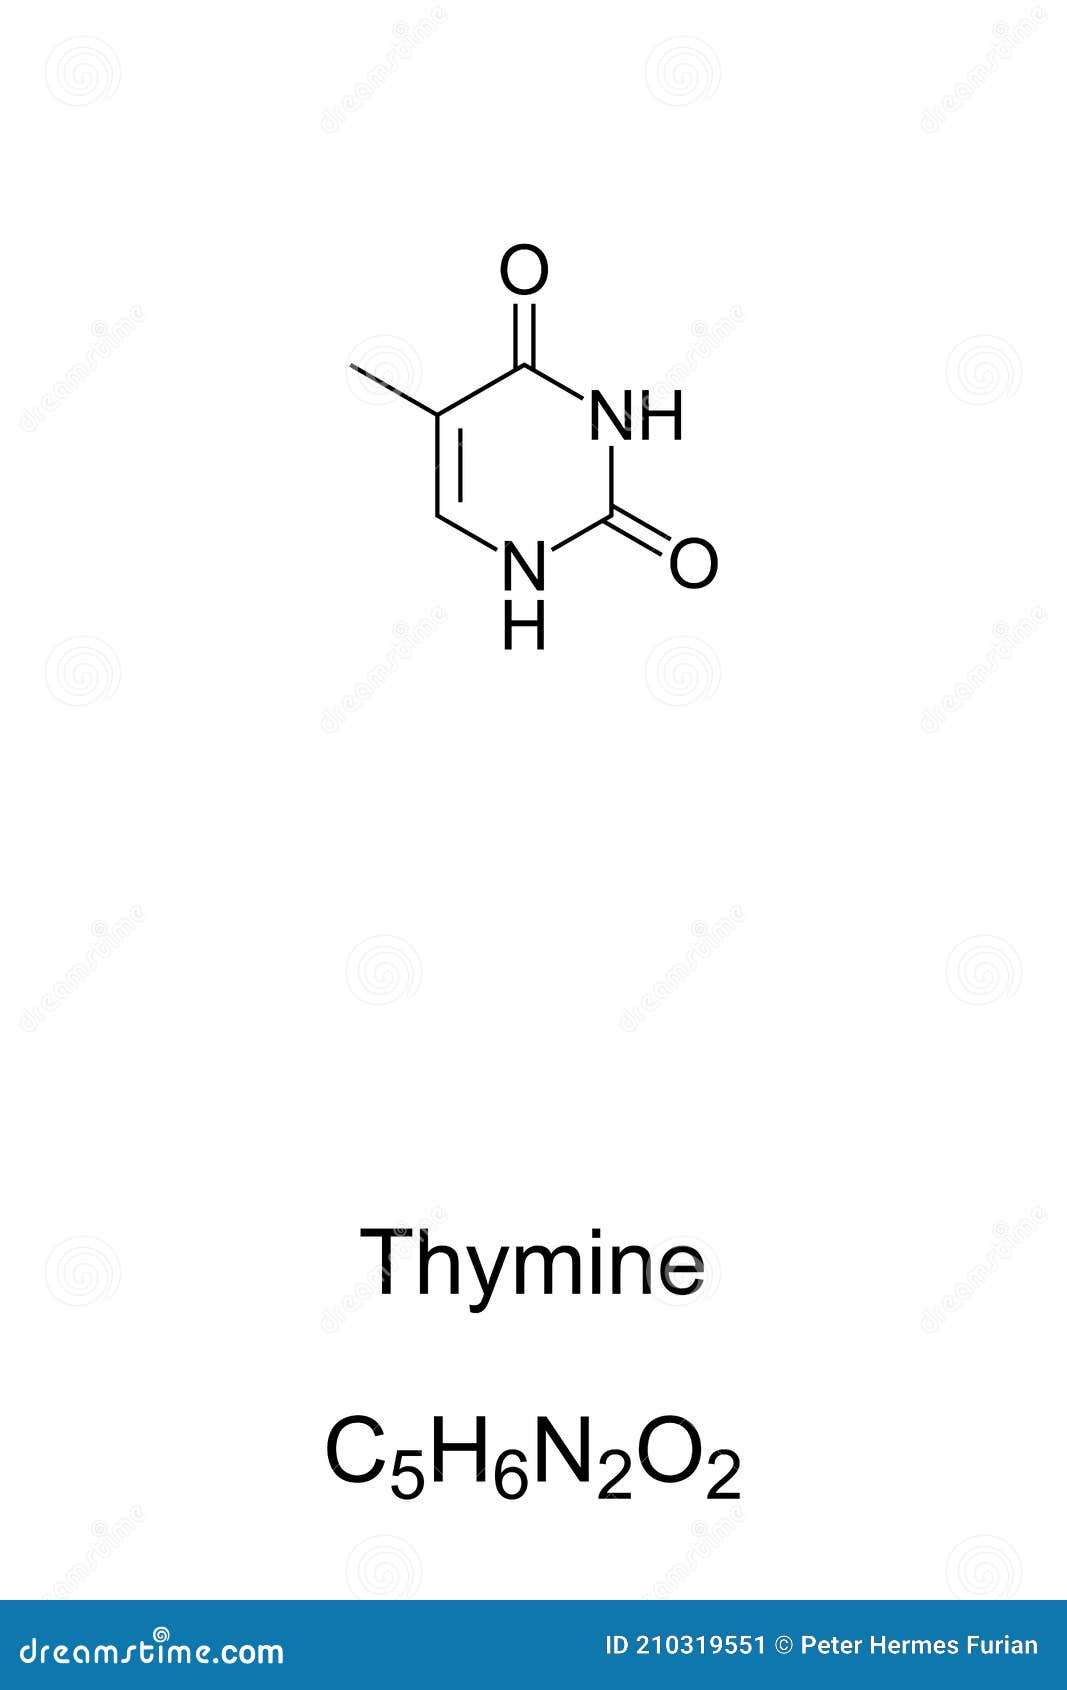 thymine, t, thy, nucleobase, chemical formula and skeletal structure